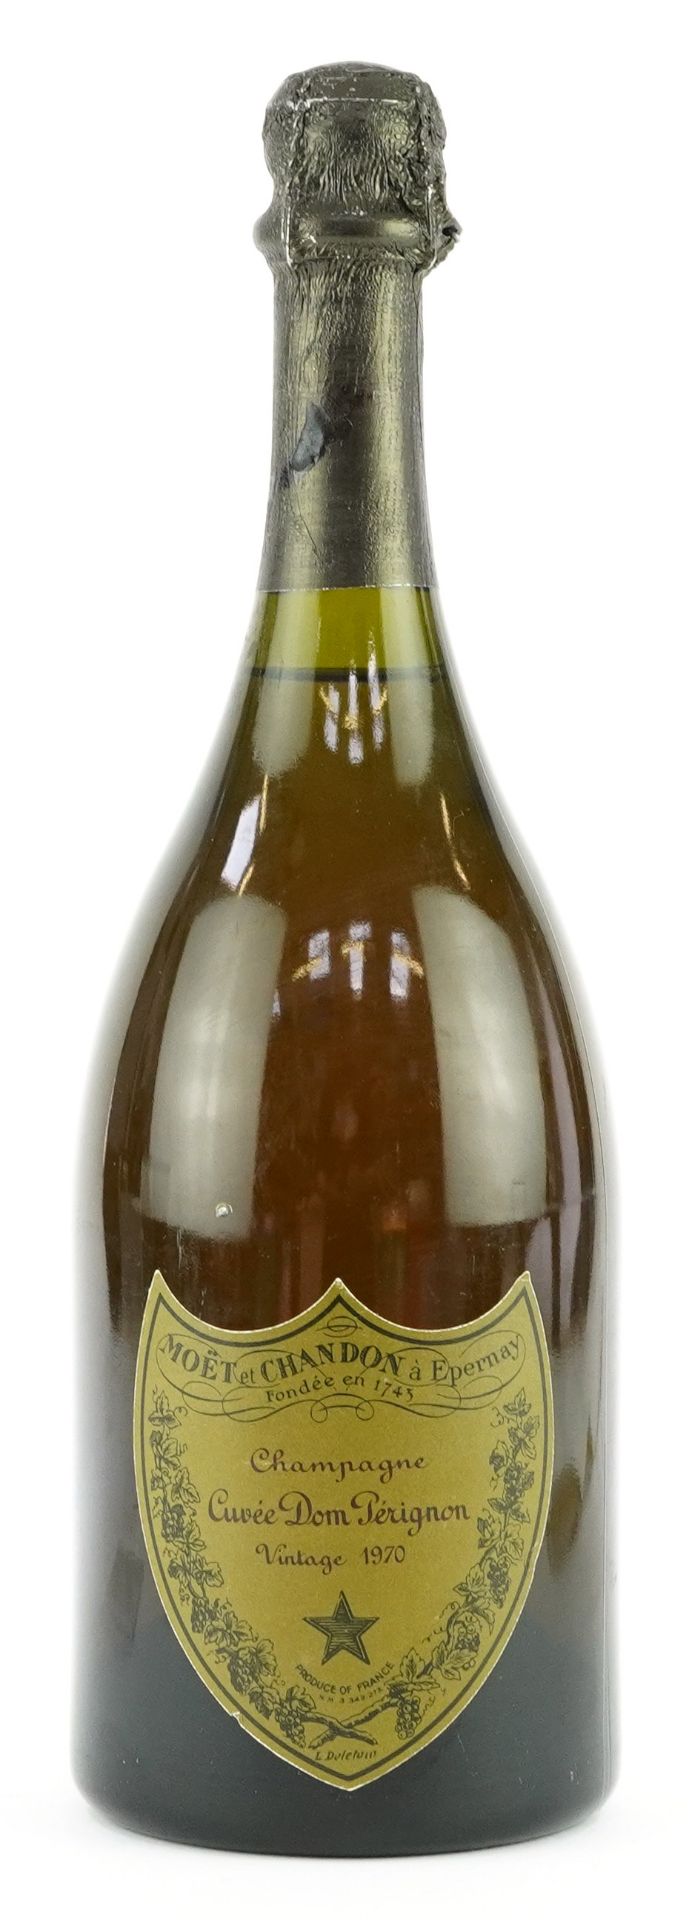 Bottle of Moet & Chandon vintage 1970 Dom Perignon Champagne : For further information on this lot